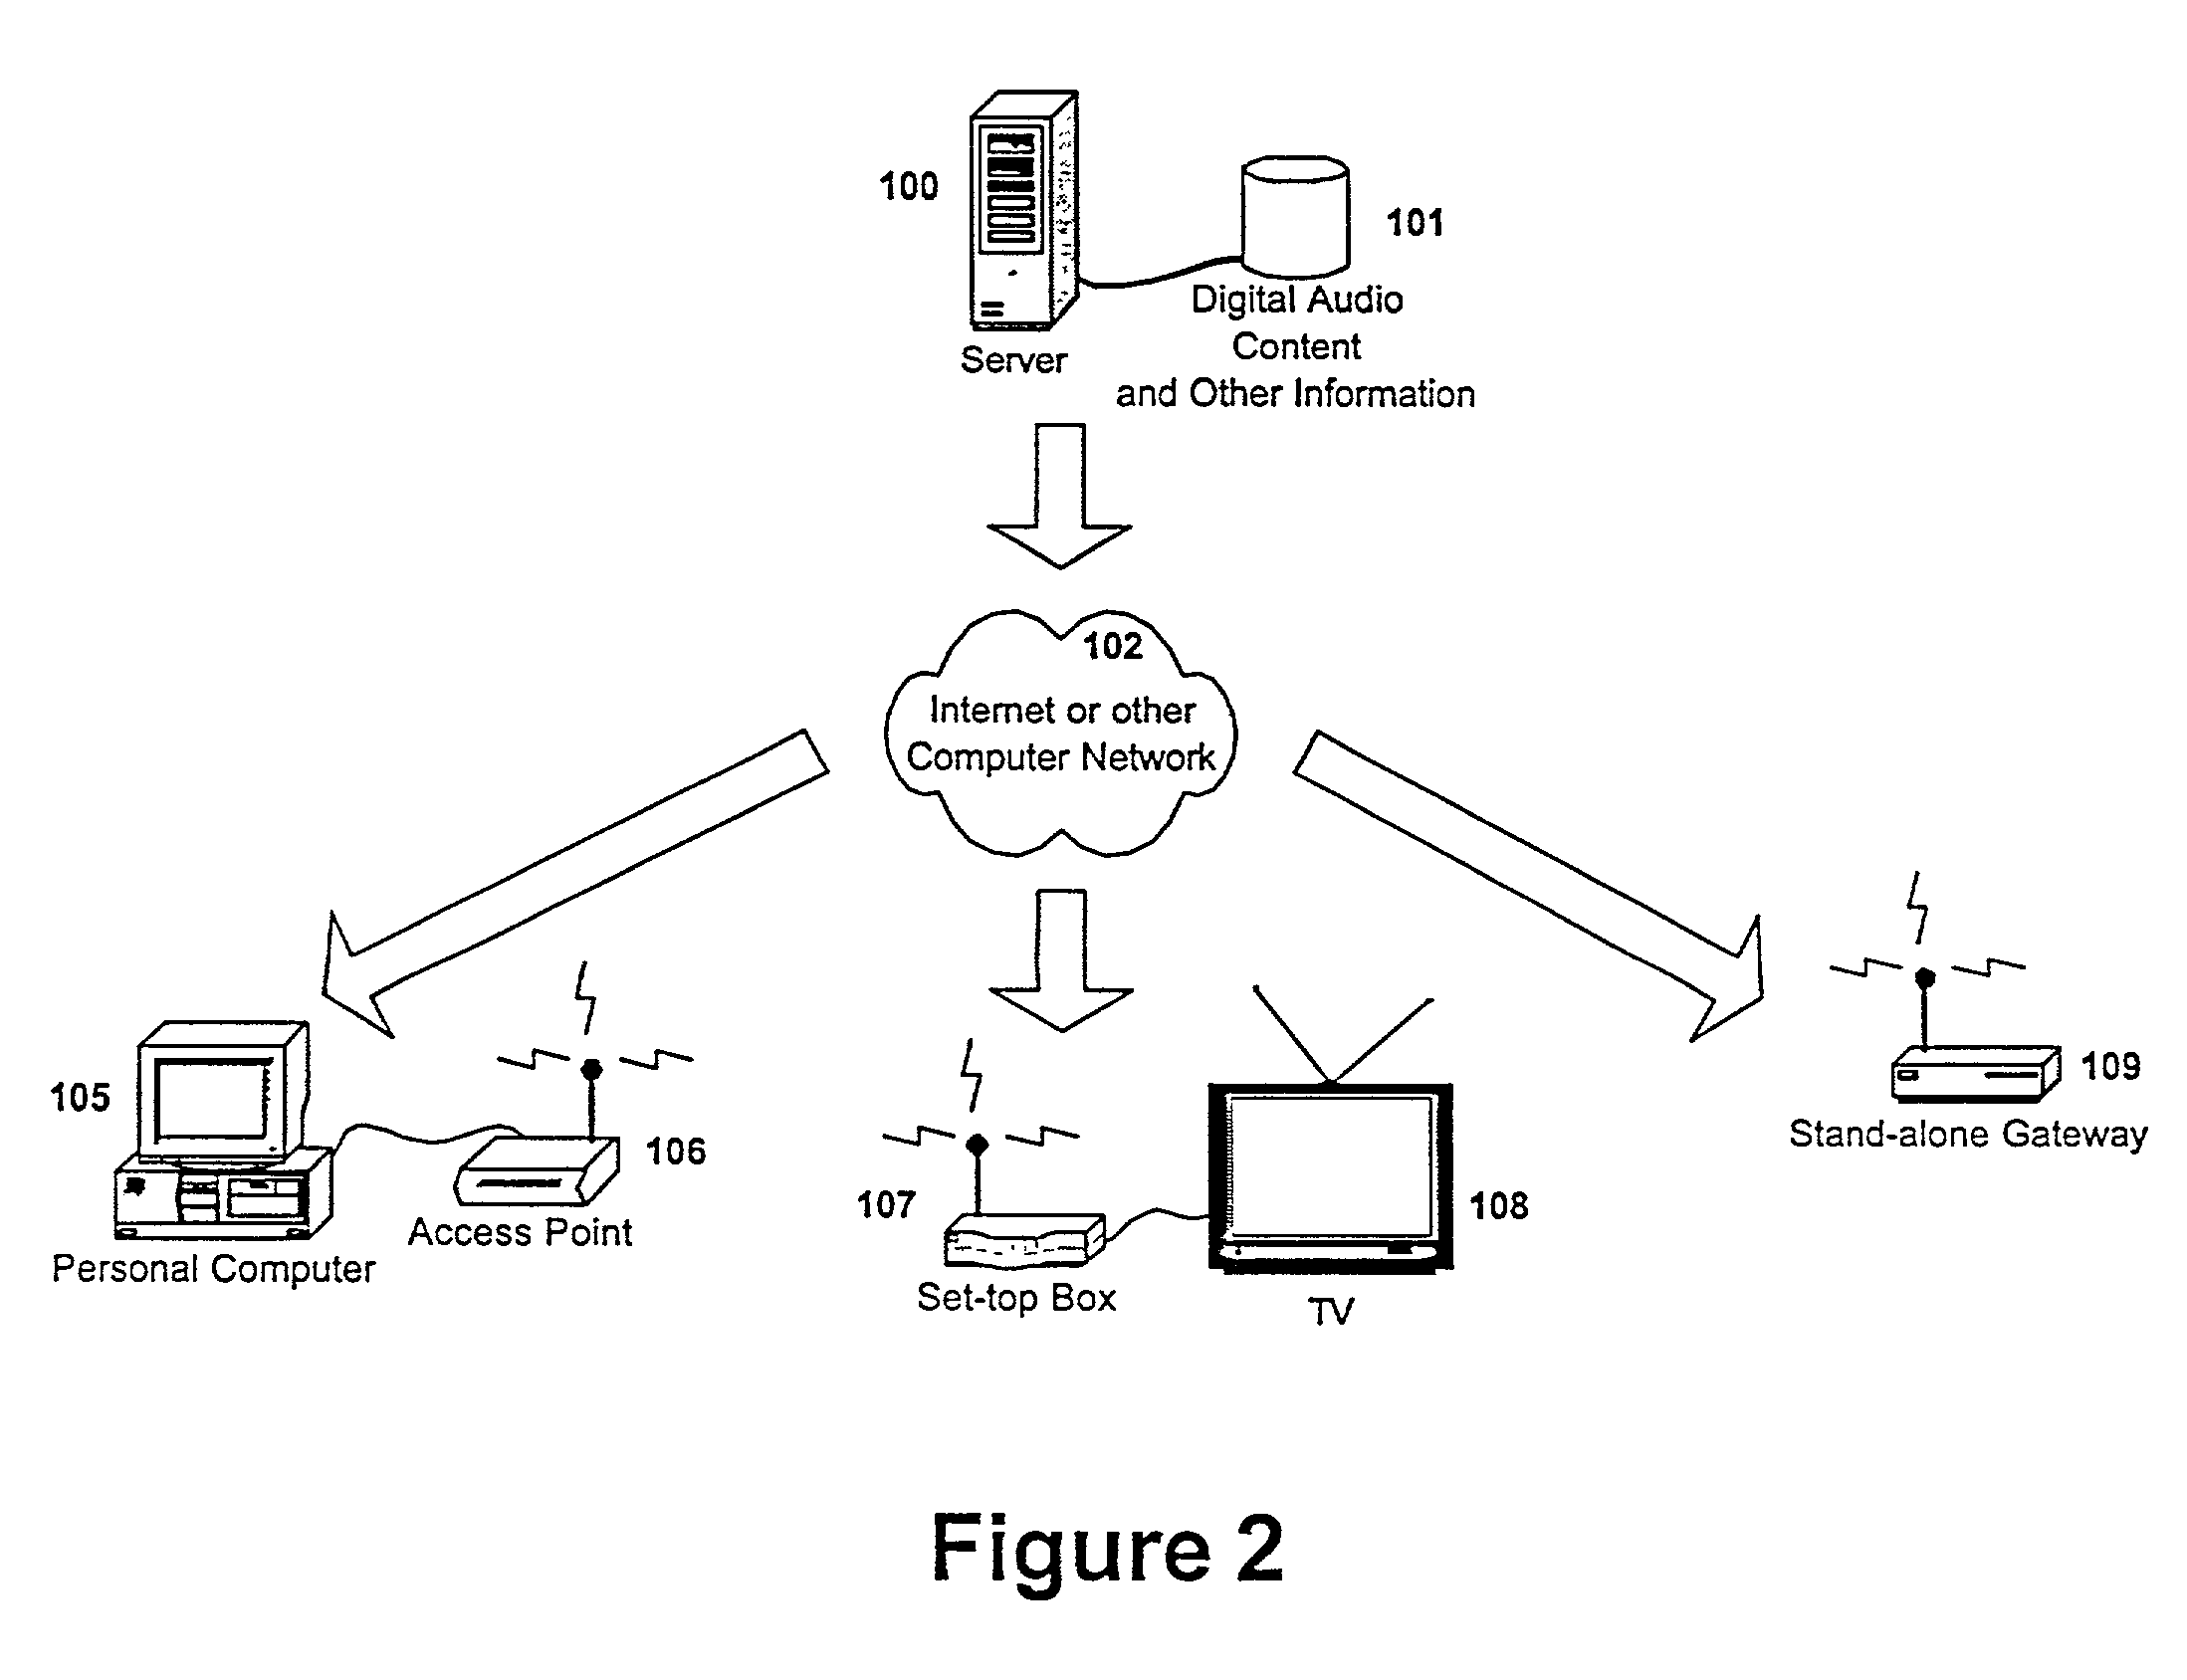 Proximity synchronization of audio content among multiple playback and storage devices